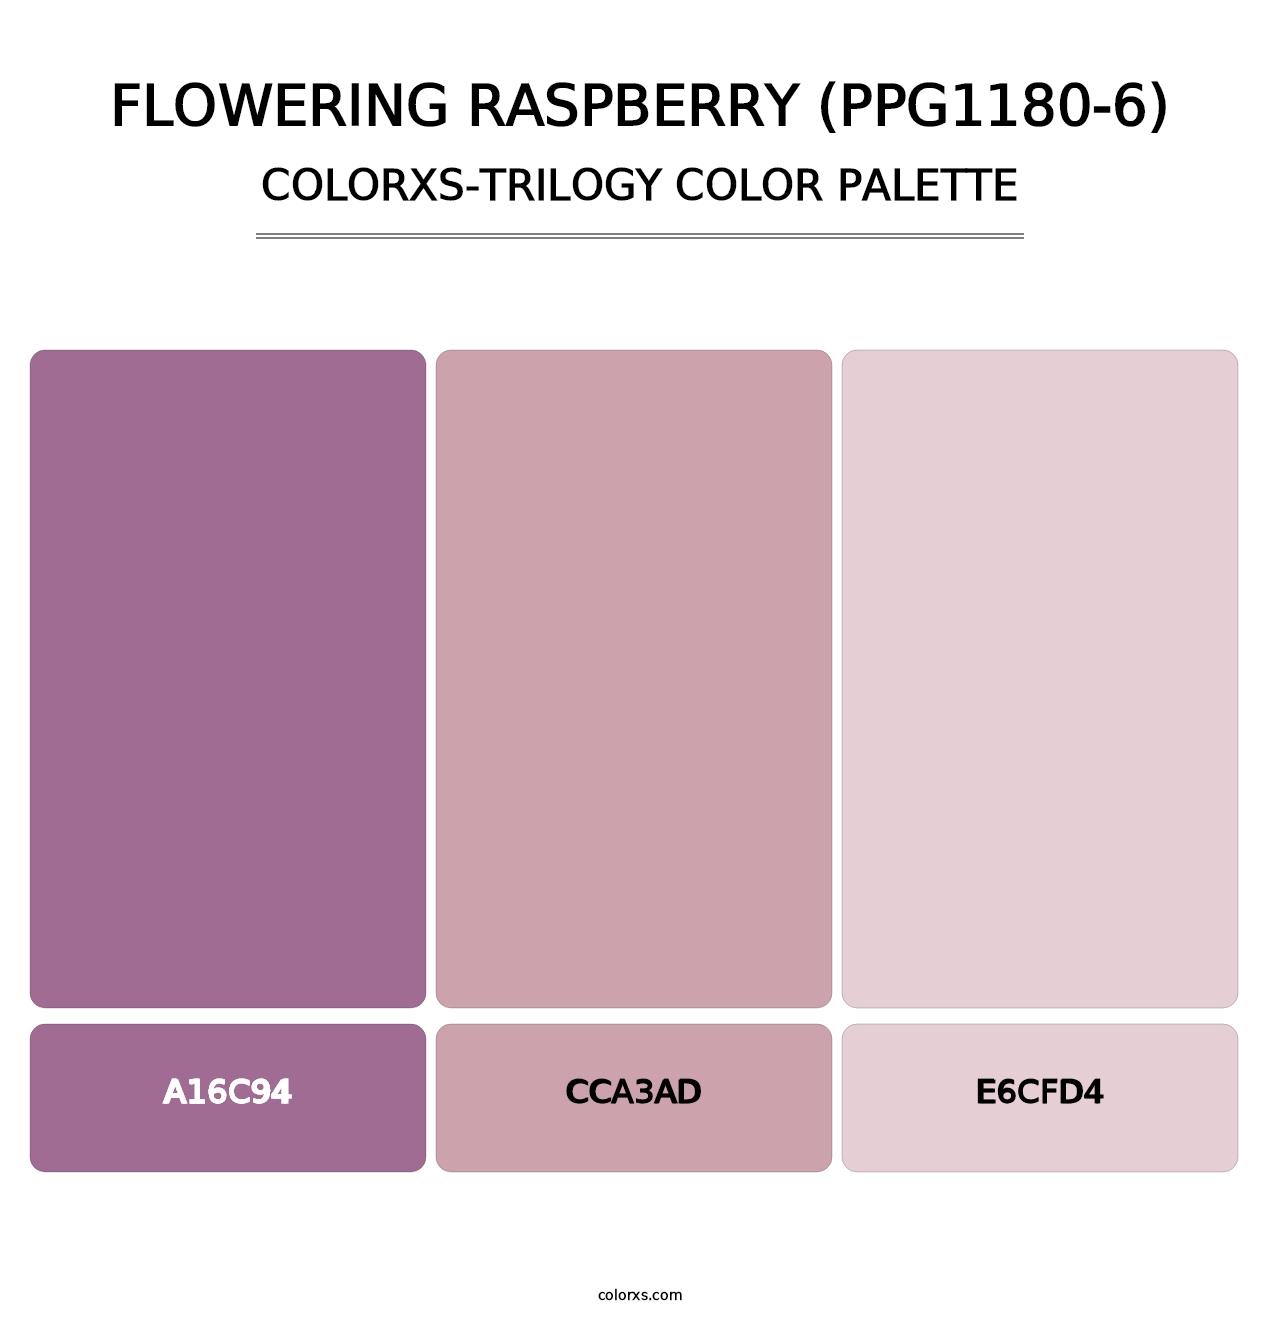 Flowering Raspberry (PPG1180-6) - Colorxs Trilogy Palette